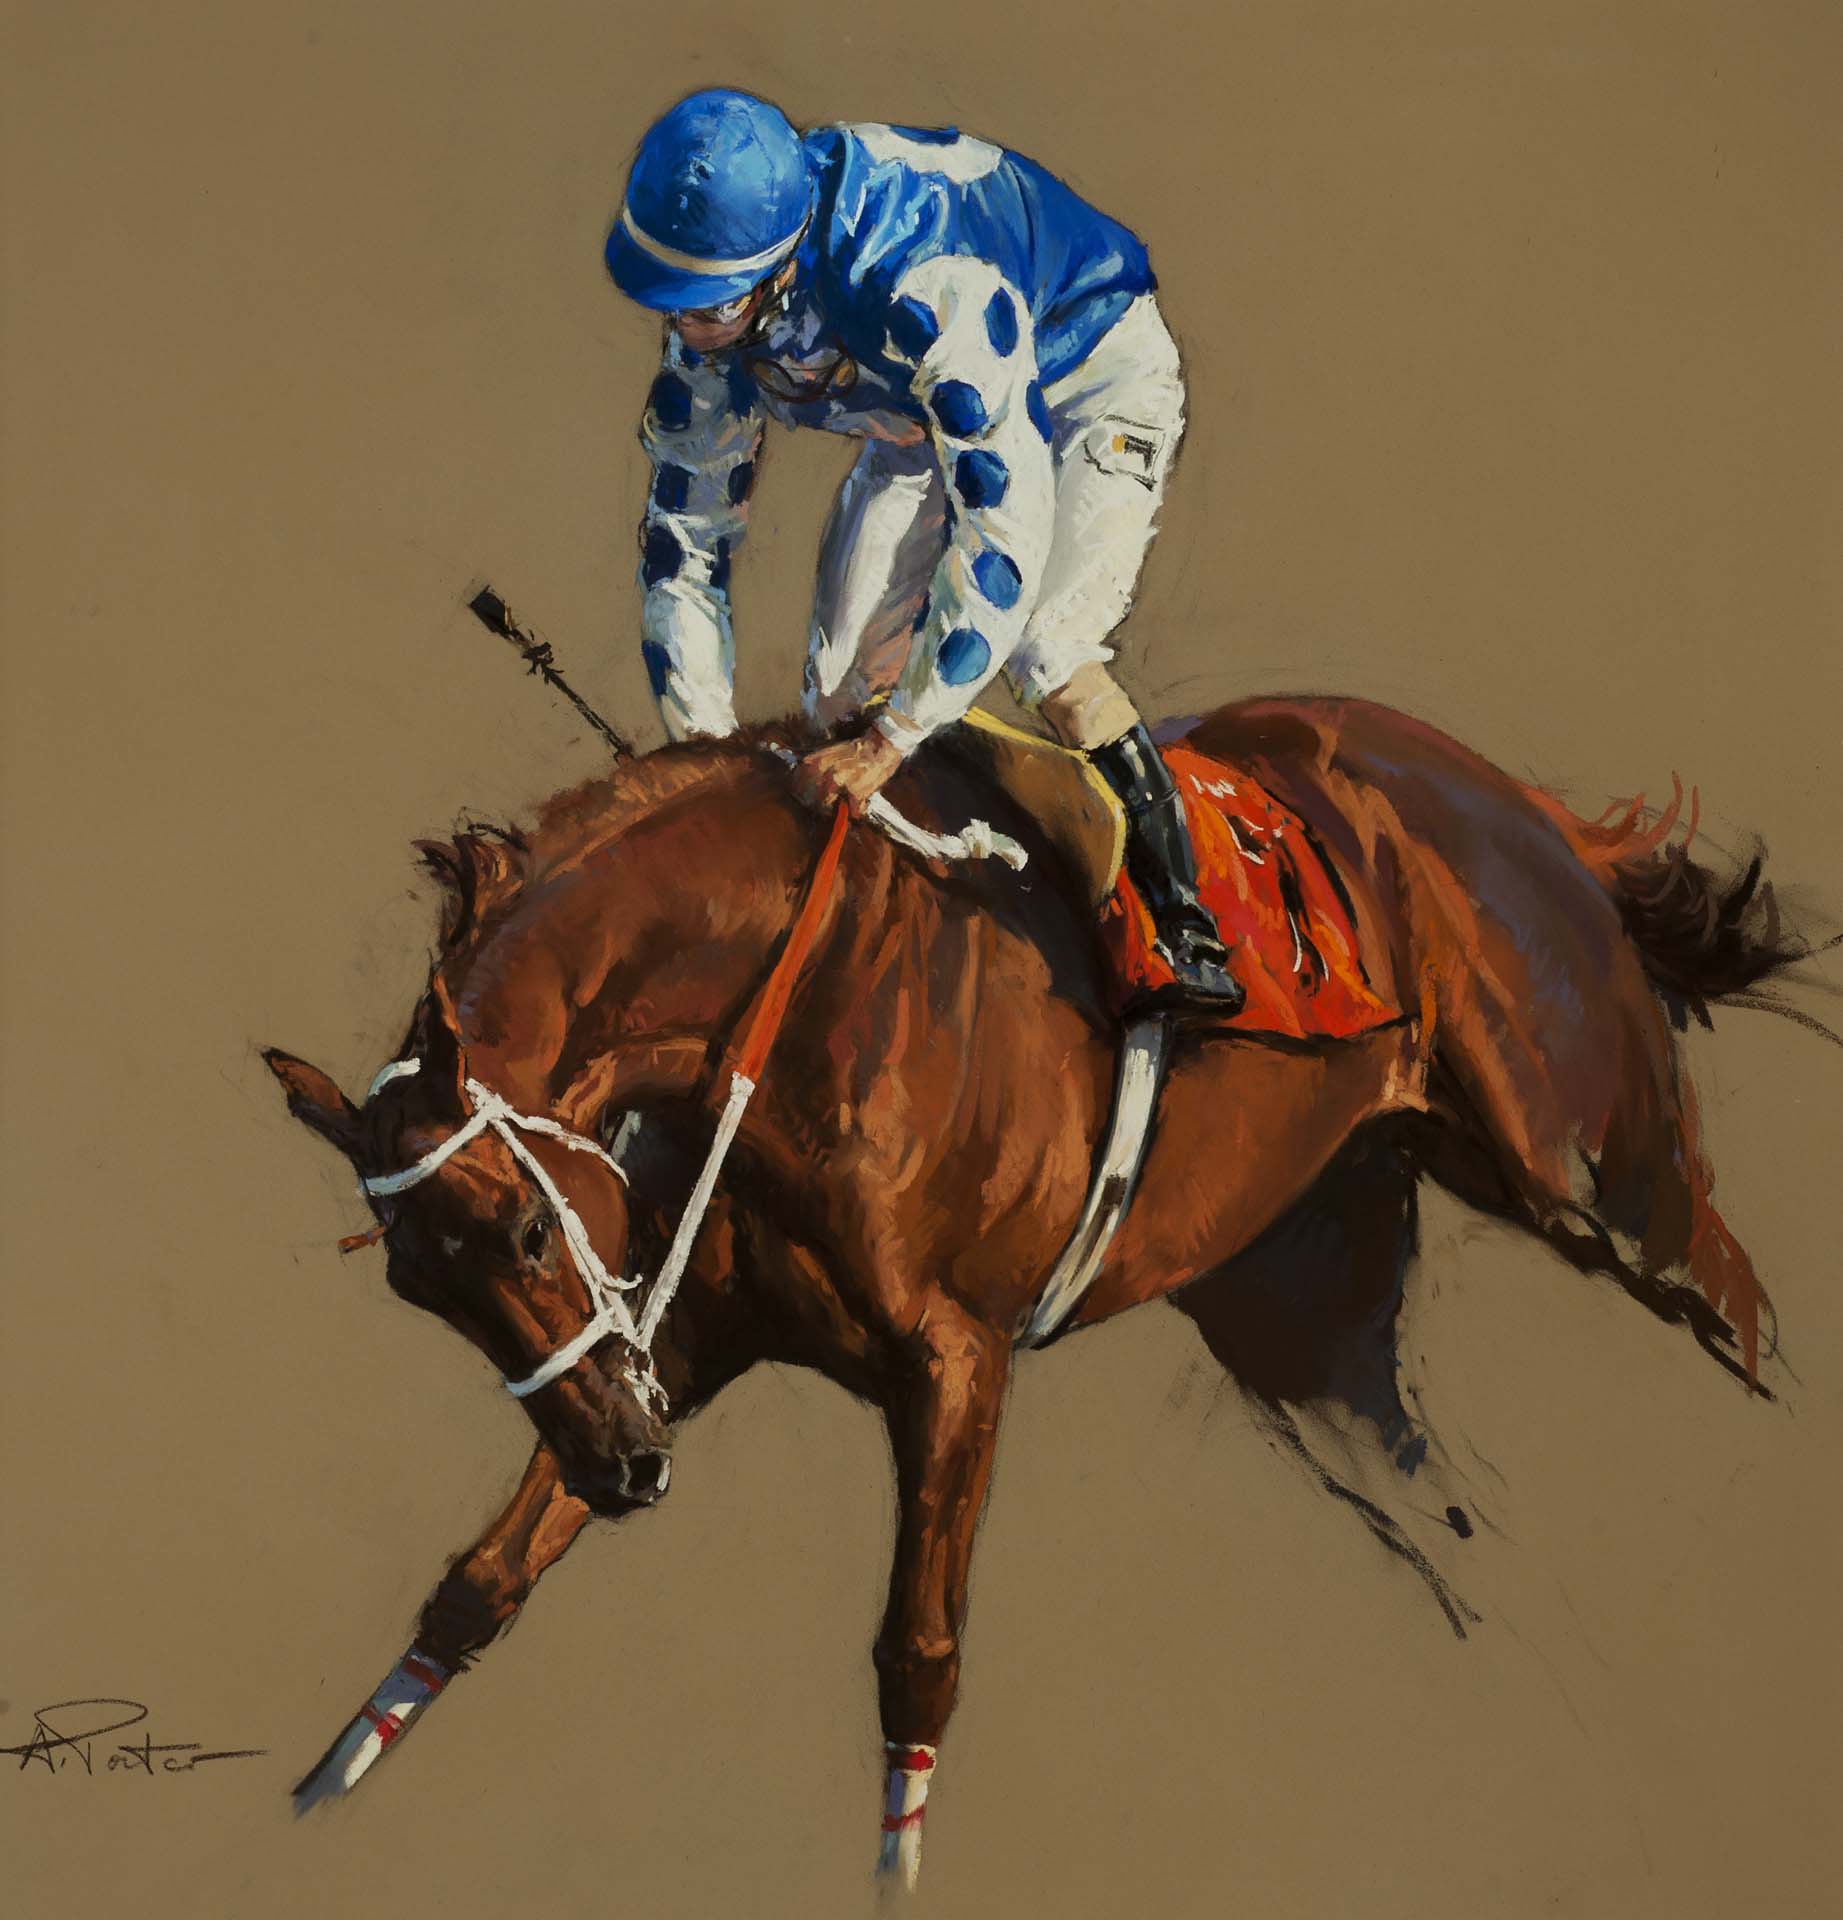 SMARTY JONES by Andre Pater (Polish/American, born 1953)